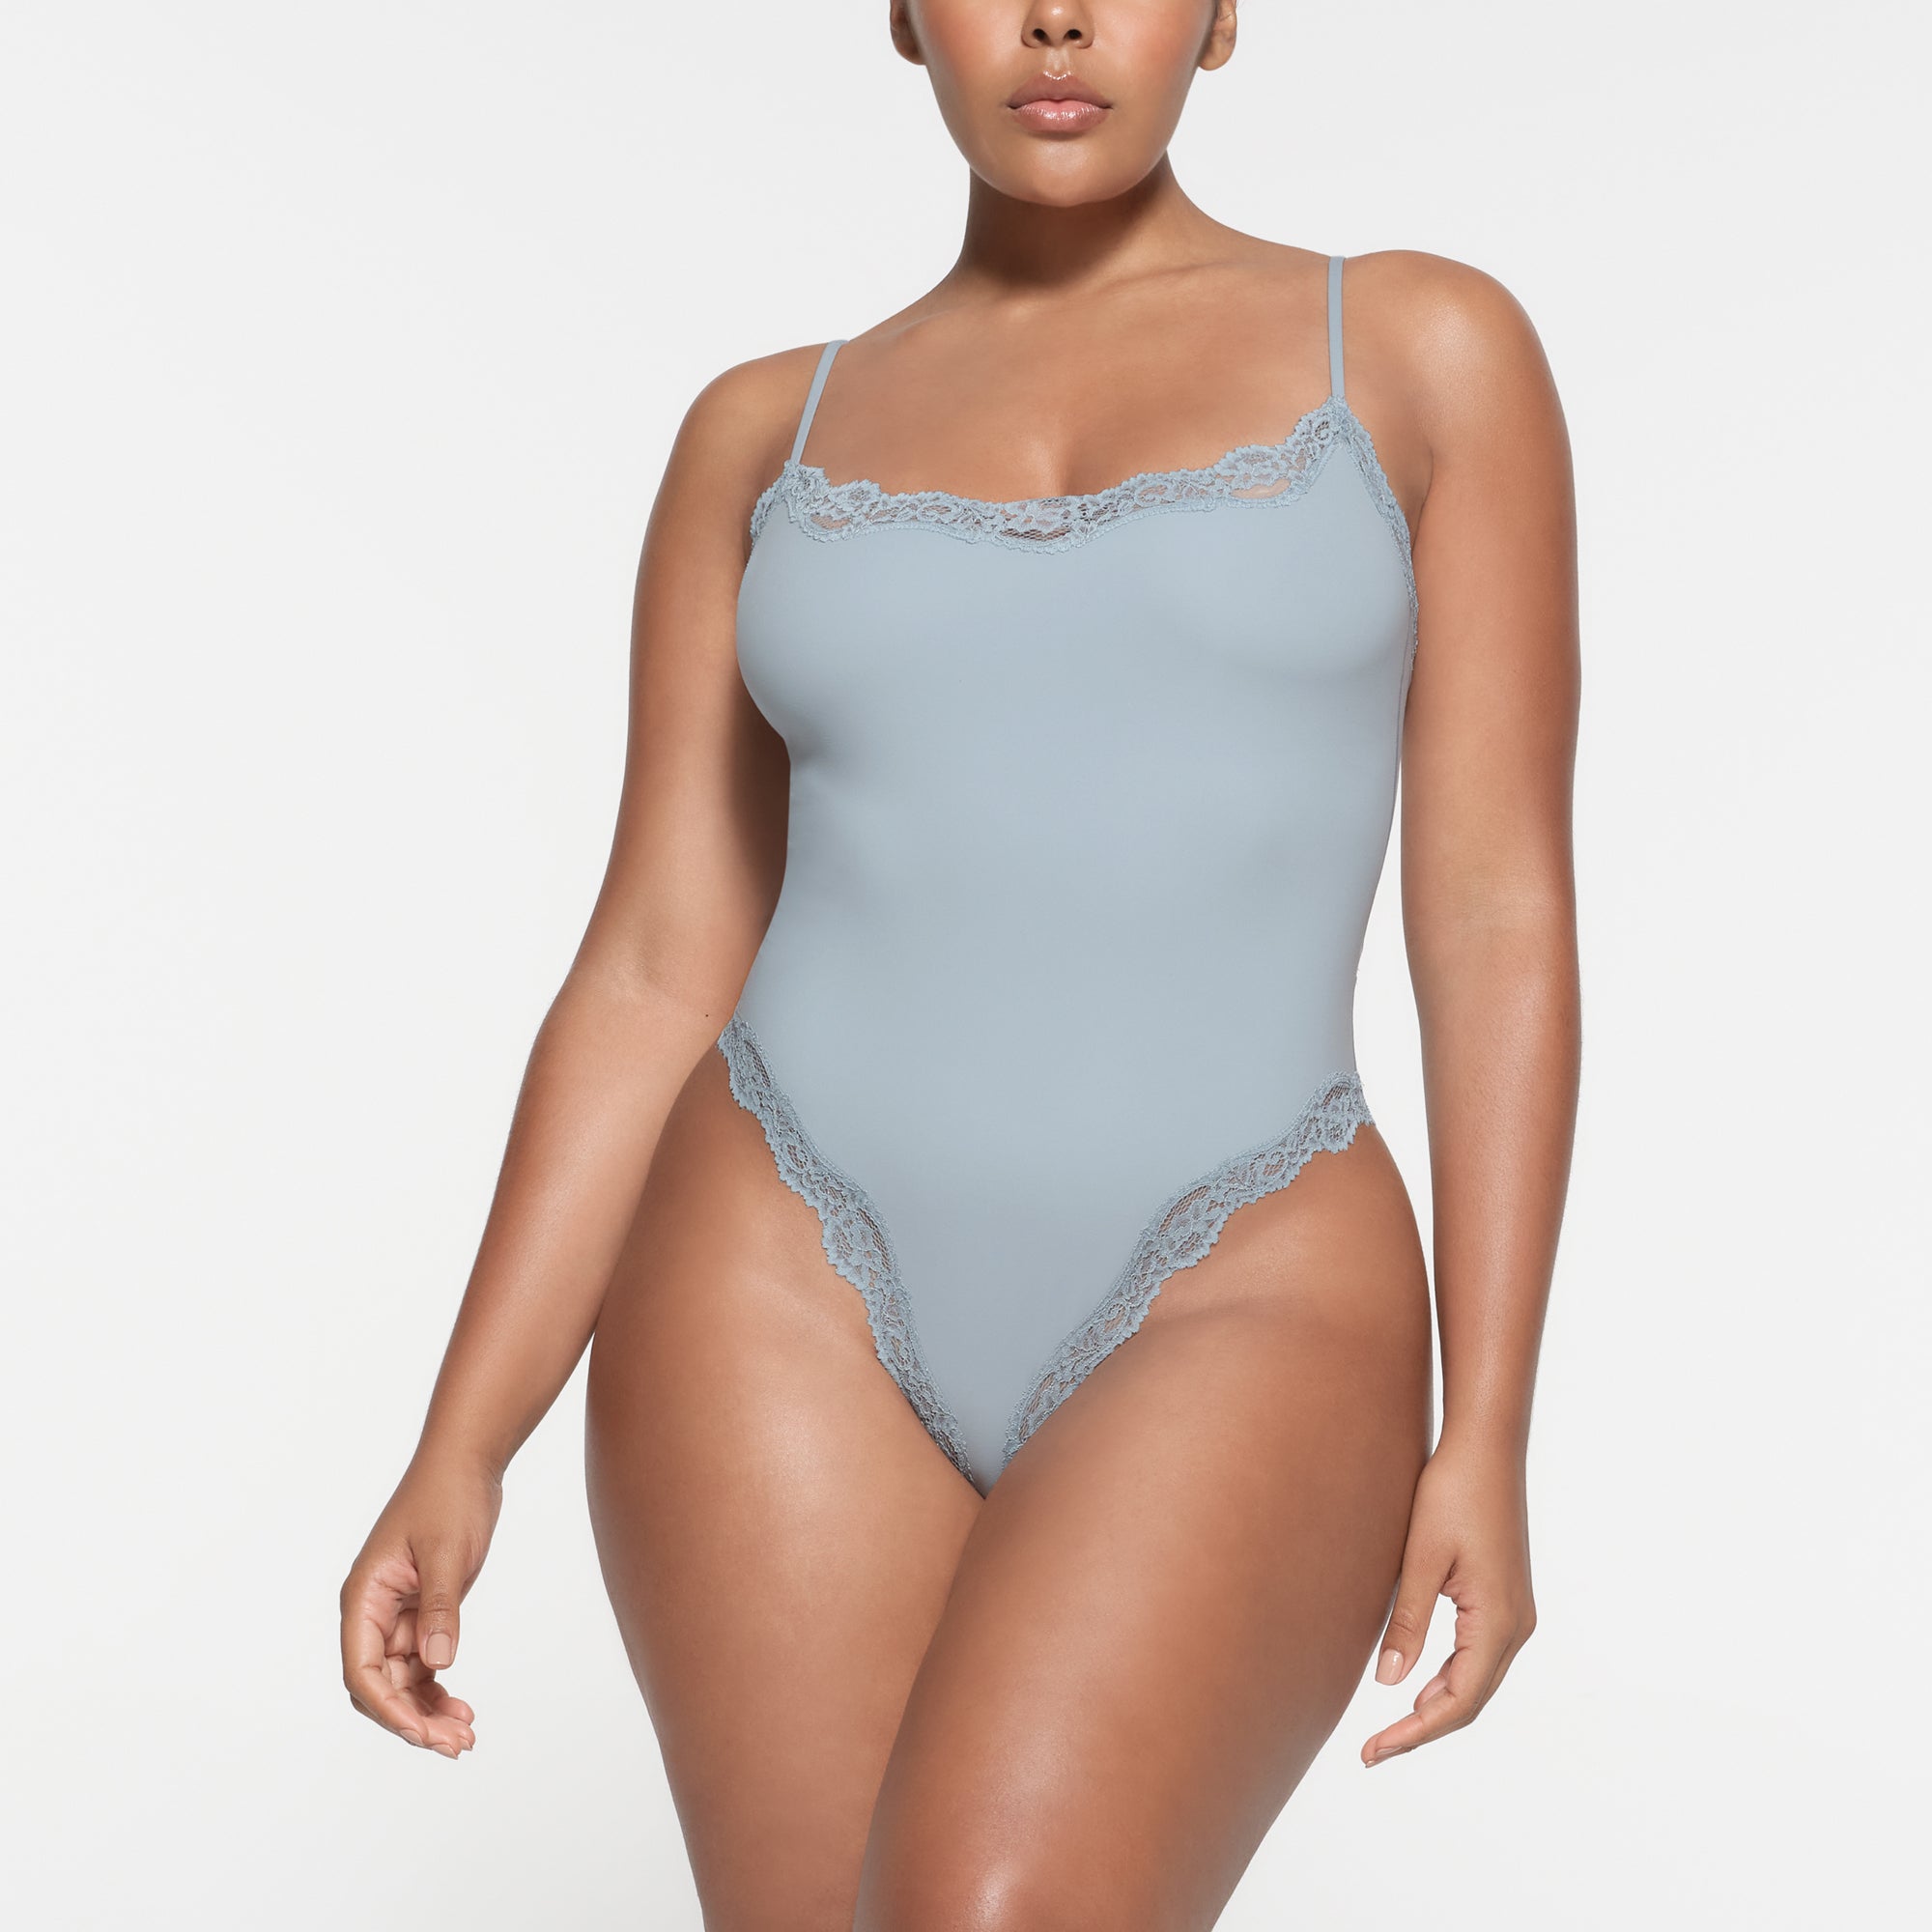 SKIMS Lace Pointelle Cami Bodysuit in Bubble Gum S - $125 New With Tags -  From Matilda